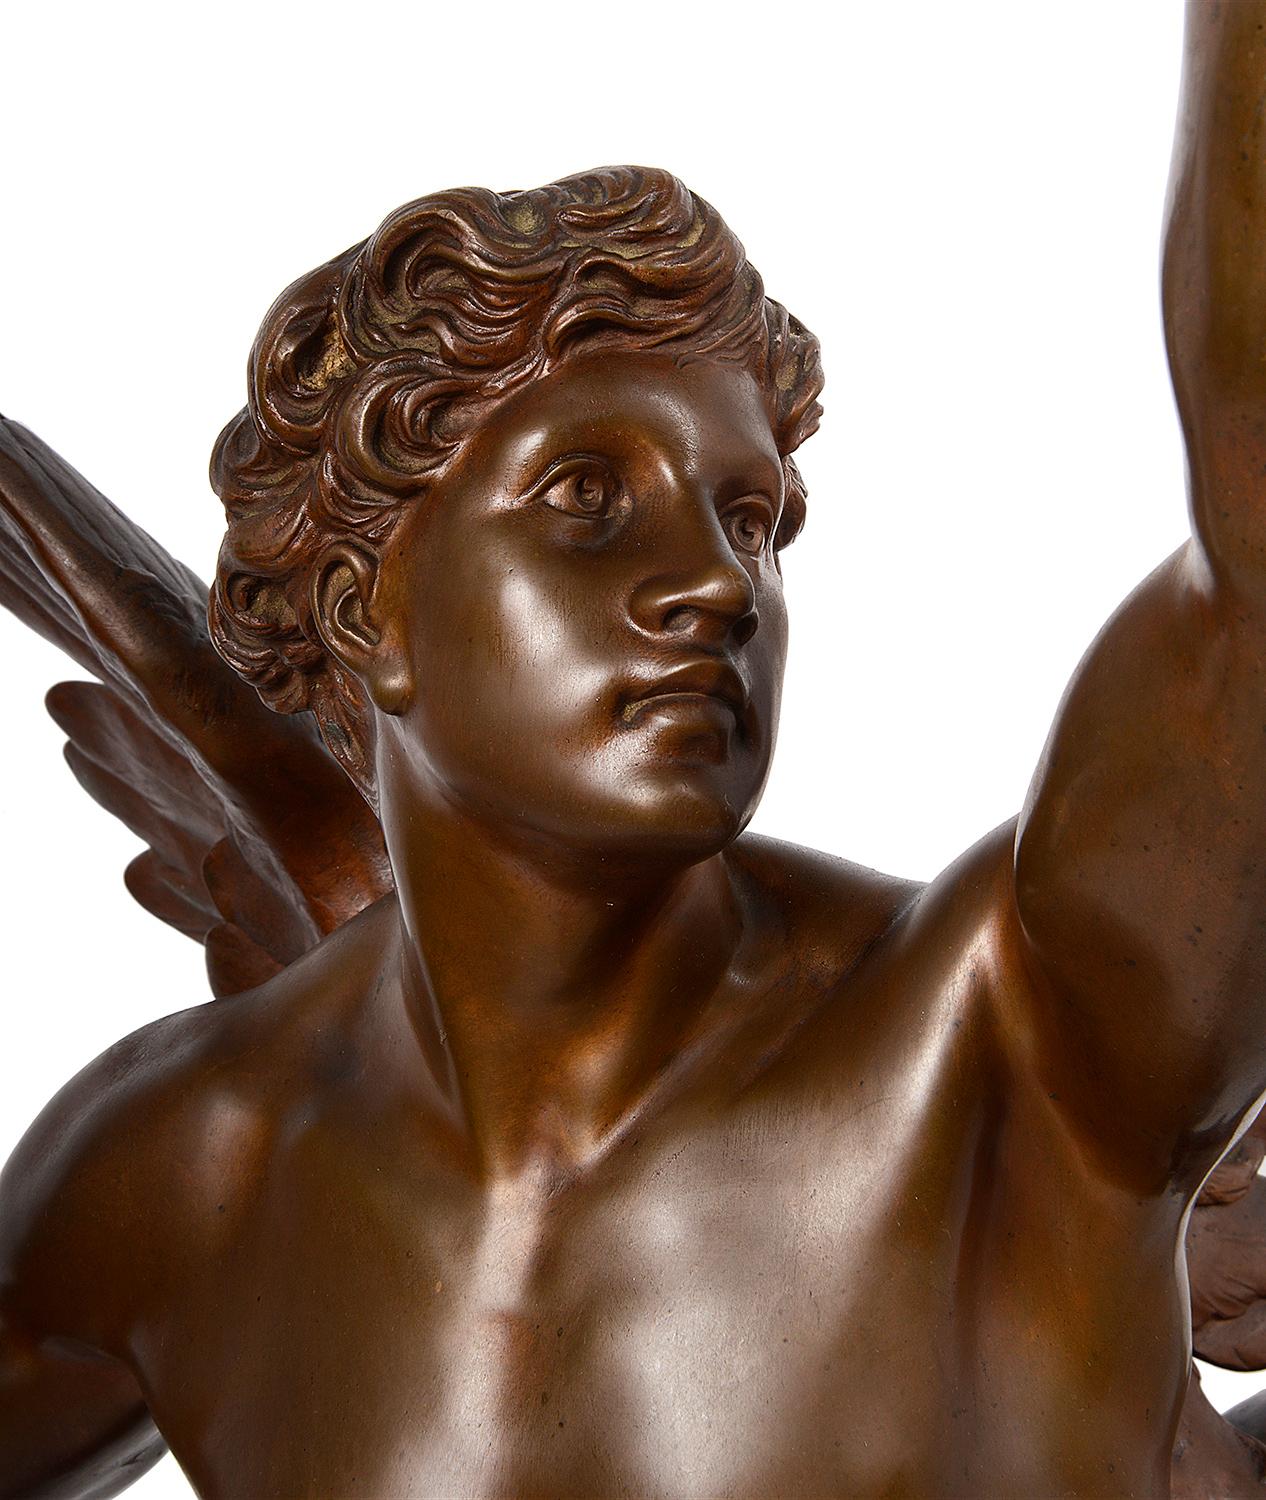 This wonderful 19th century patinated bronze statue of this winged classical figure about to take flight.
Entitled; 'Thought'
Taking flight and carrying the light.
Signed; E. Picault

Émile Louis Picault was a prolific French Orientalist